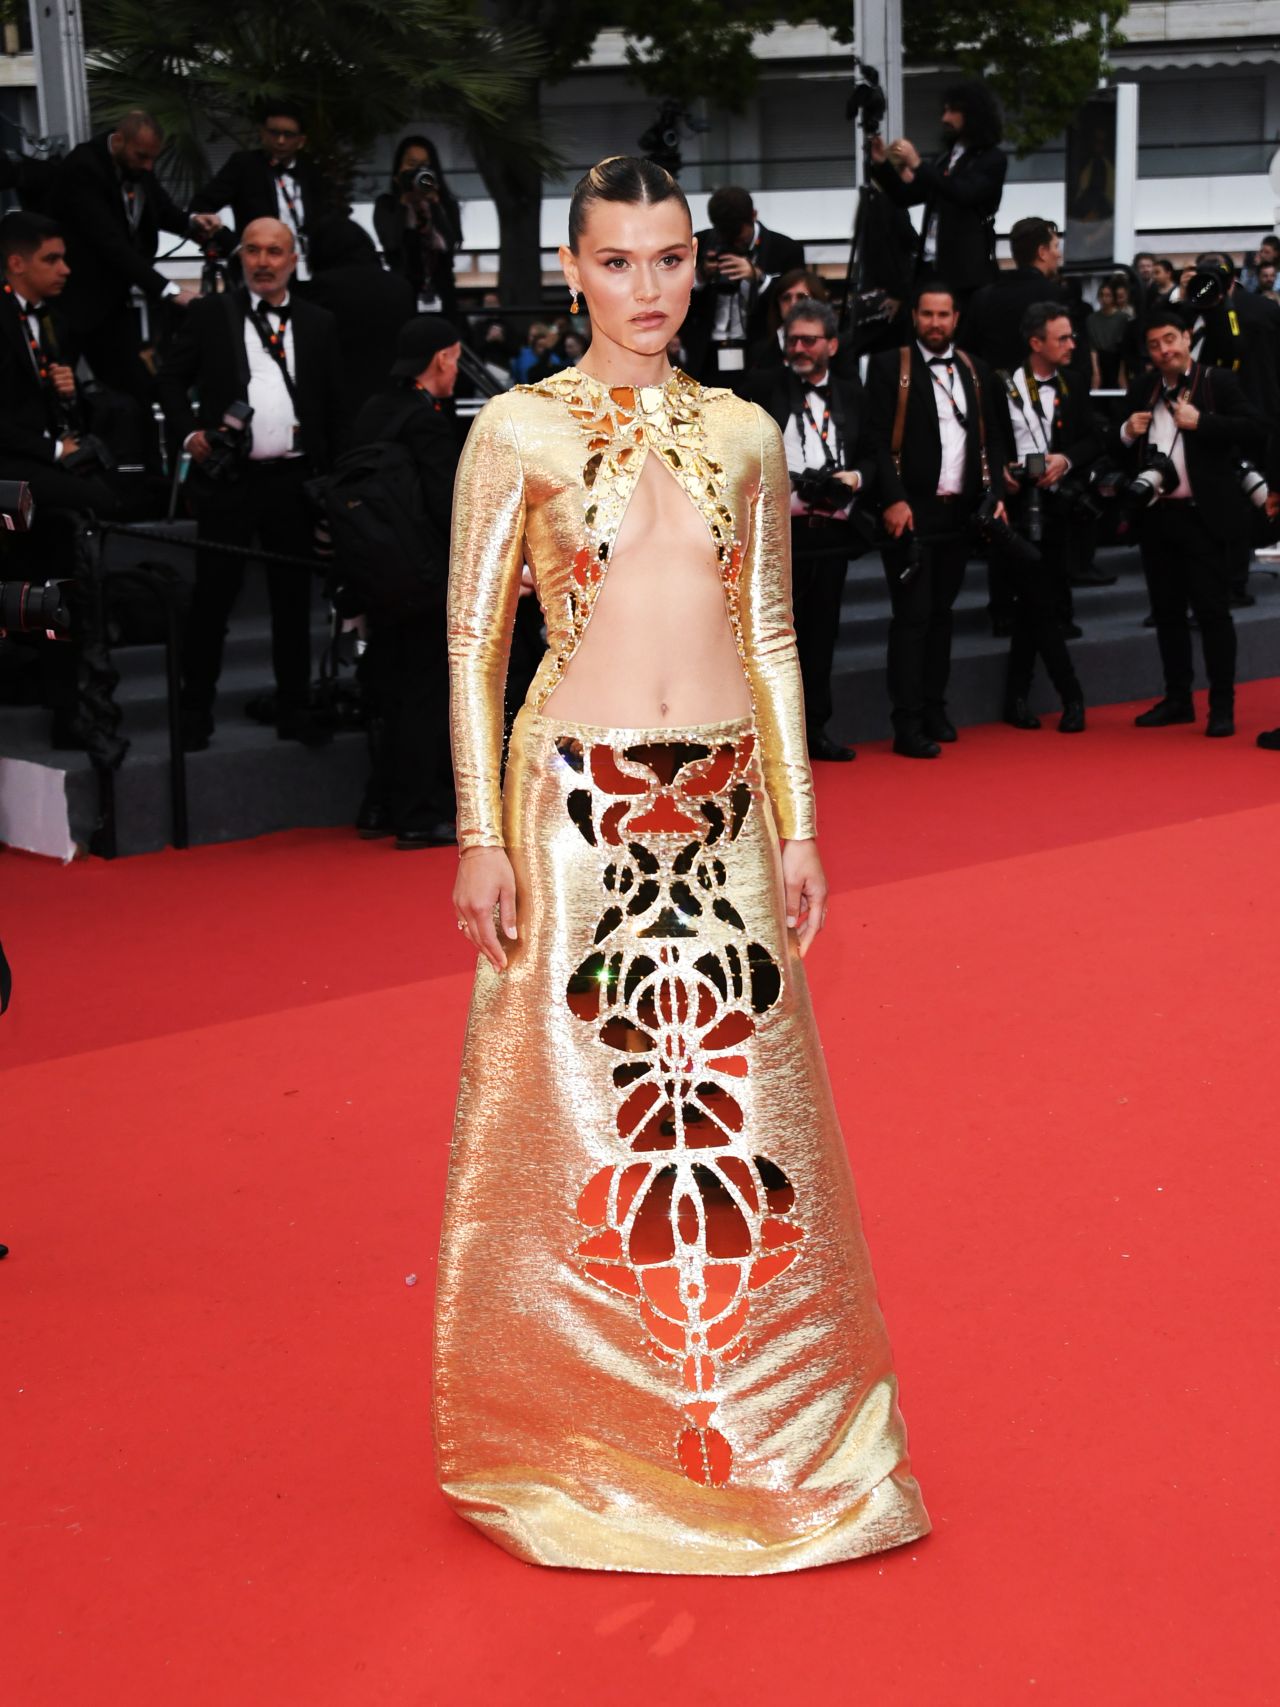 Chloe Lecareux “The Zone of Interest” Red Carpet at Cannes Film